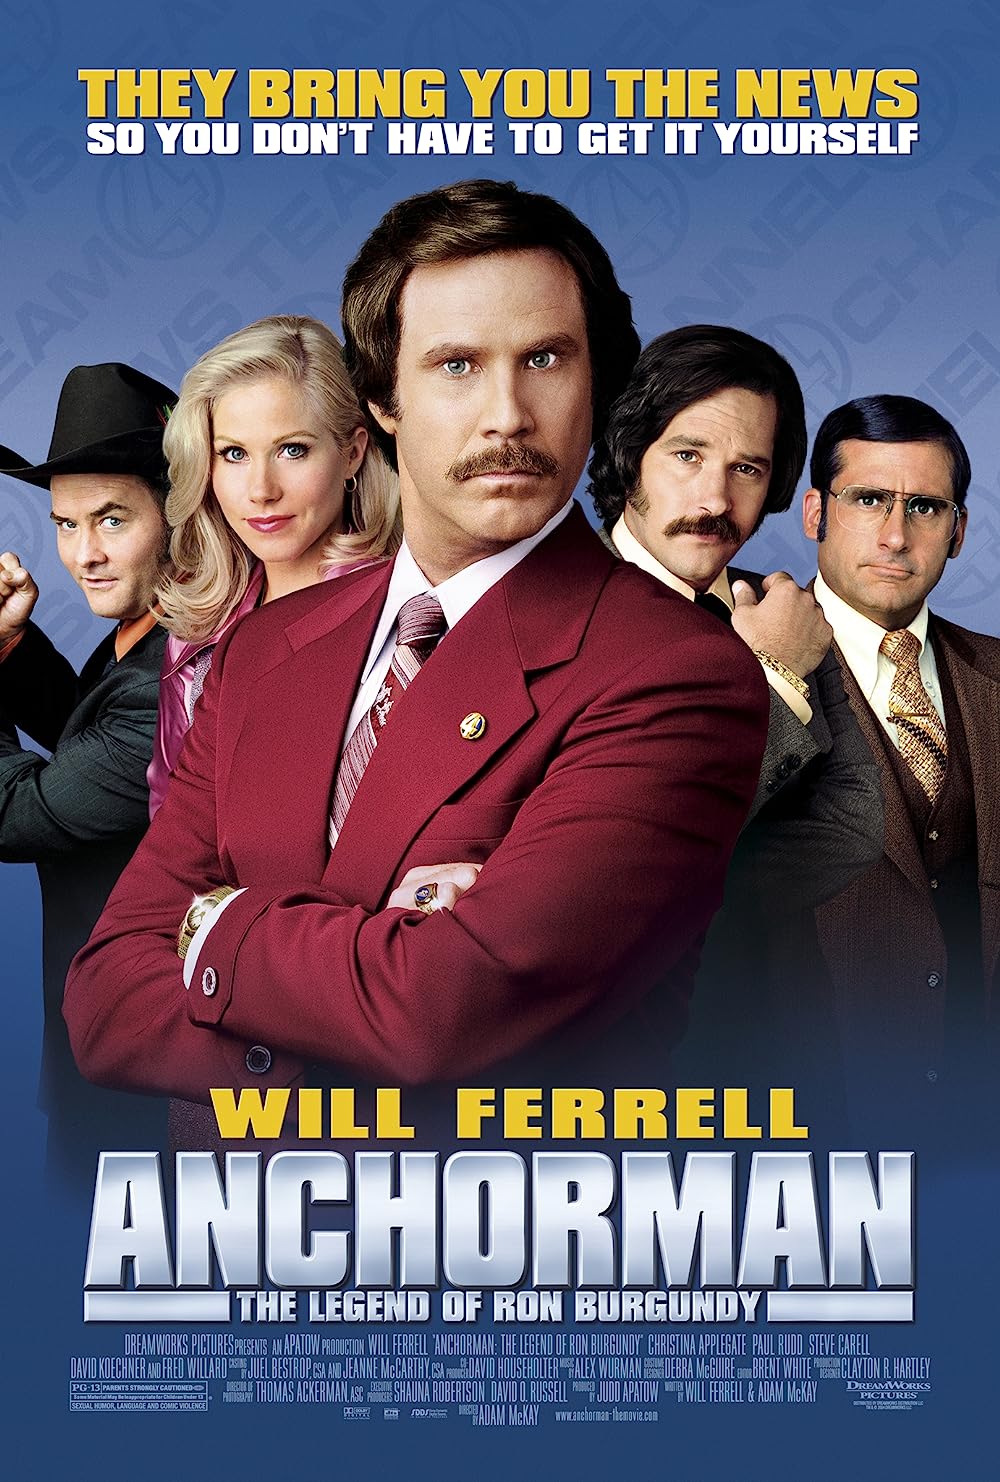 Anchorman: The Legend of Ron Burgandy